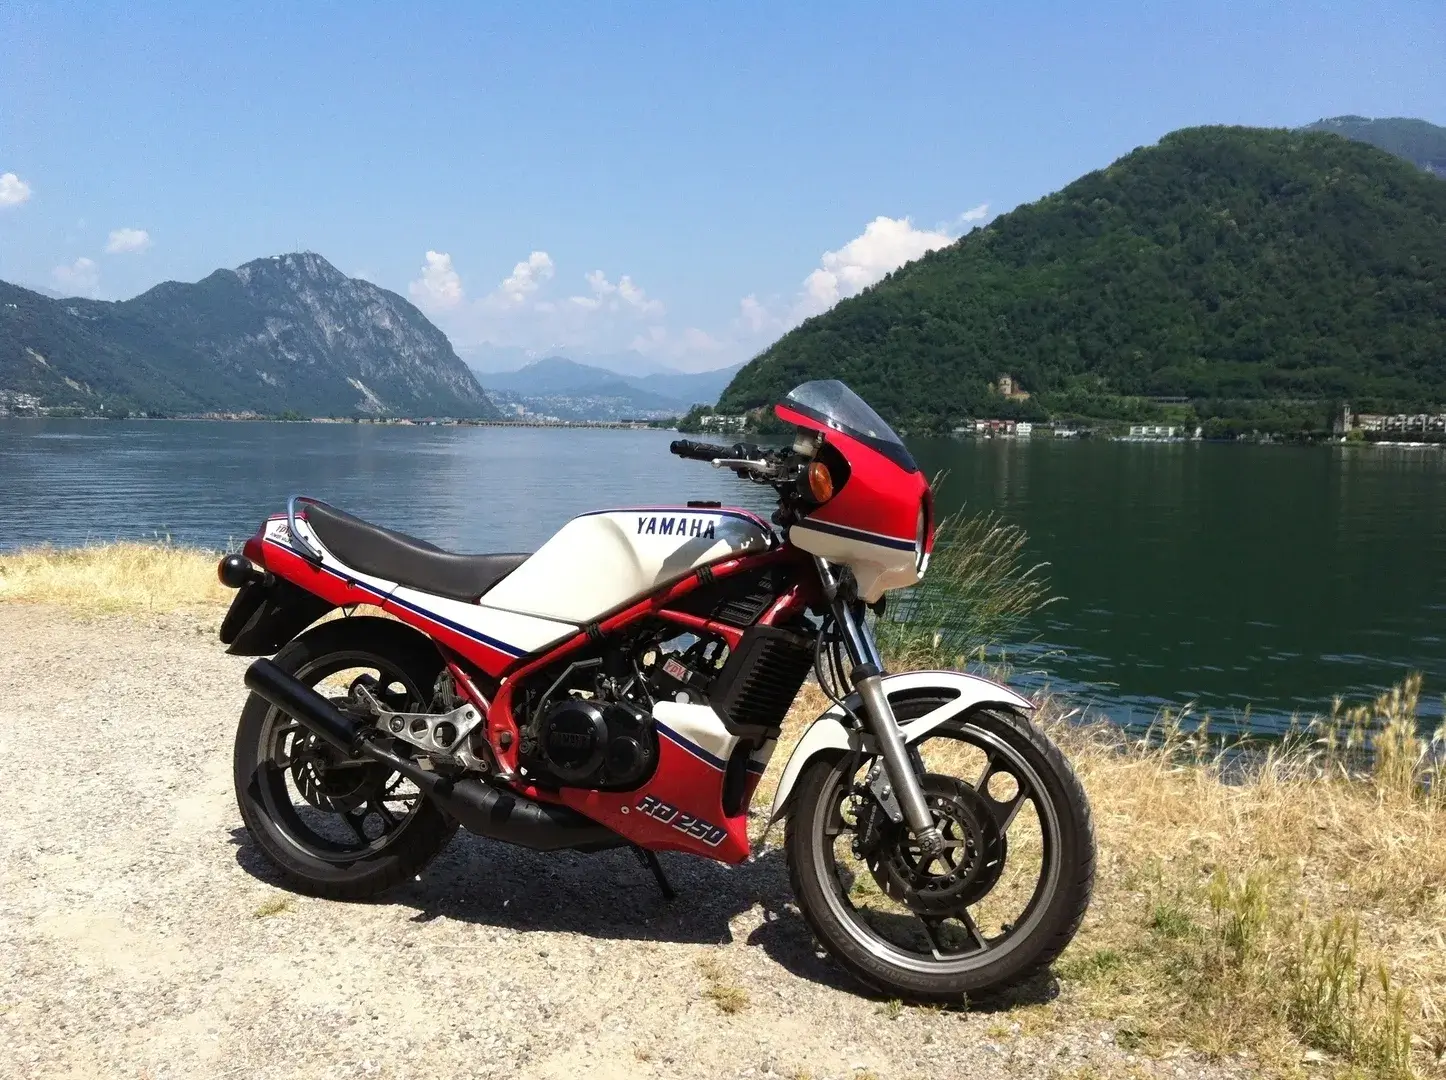 A red and white motorcycle parked on the side of a lake.